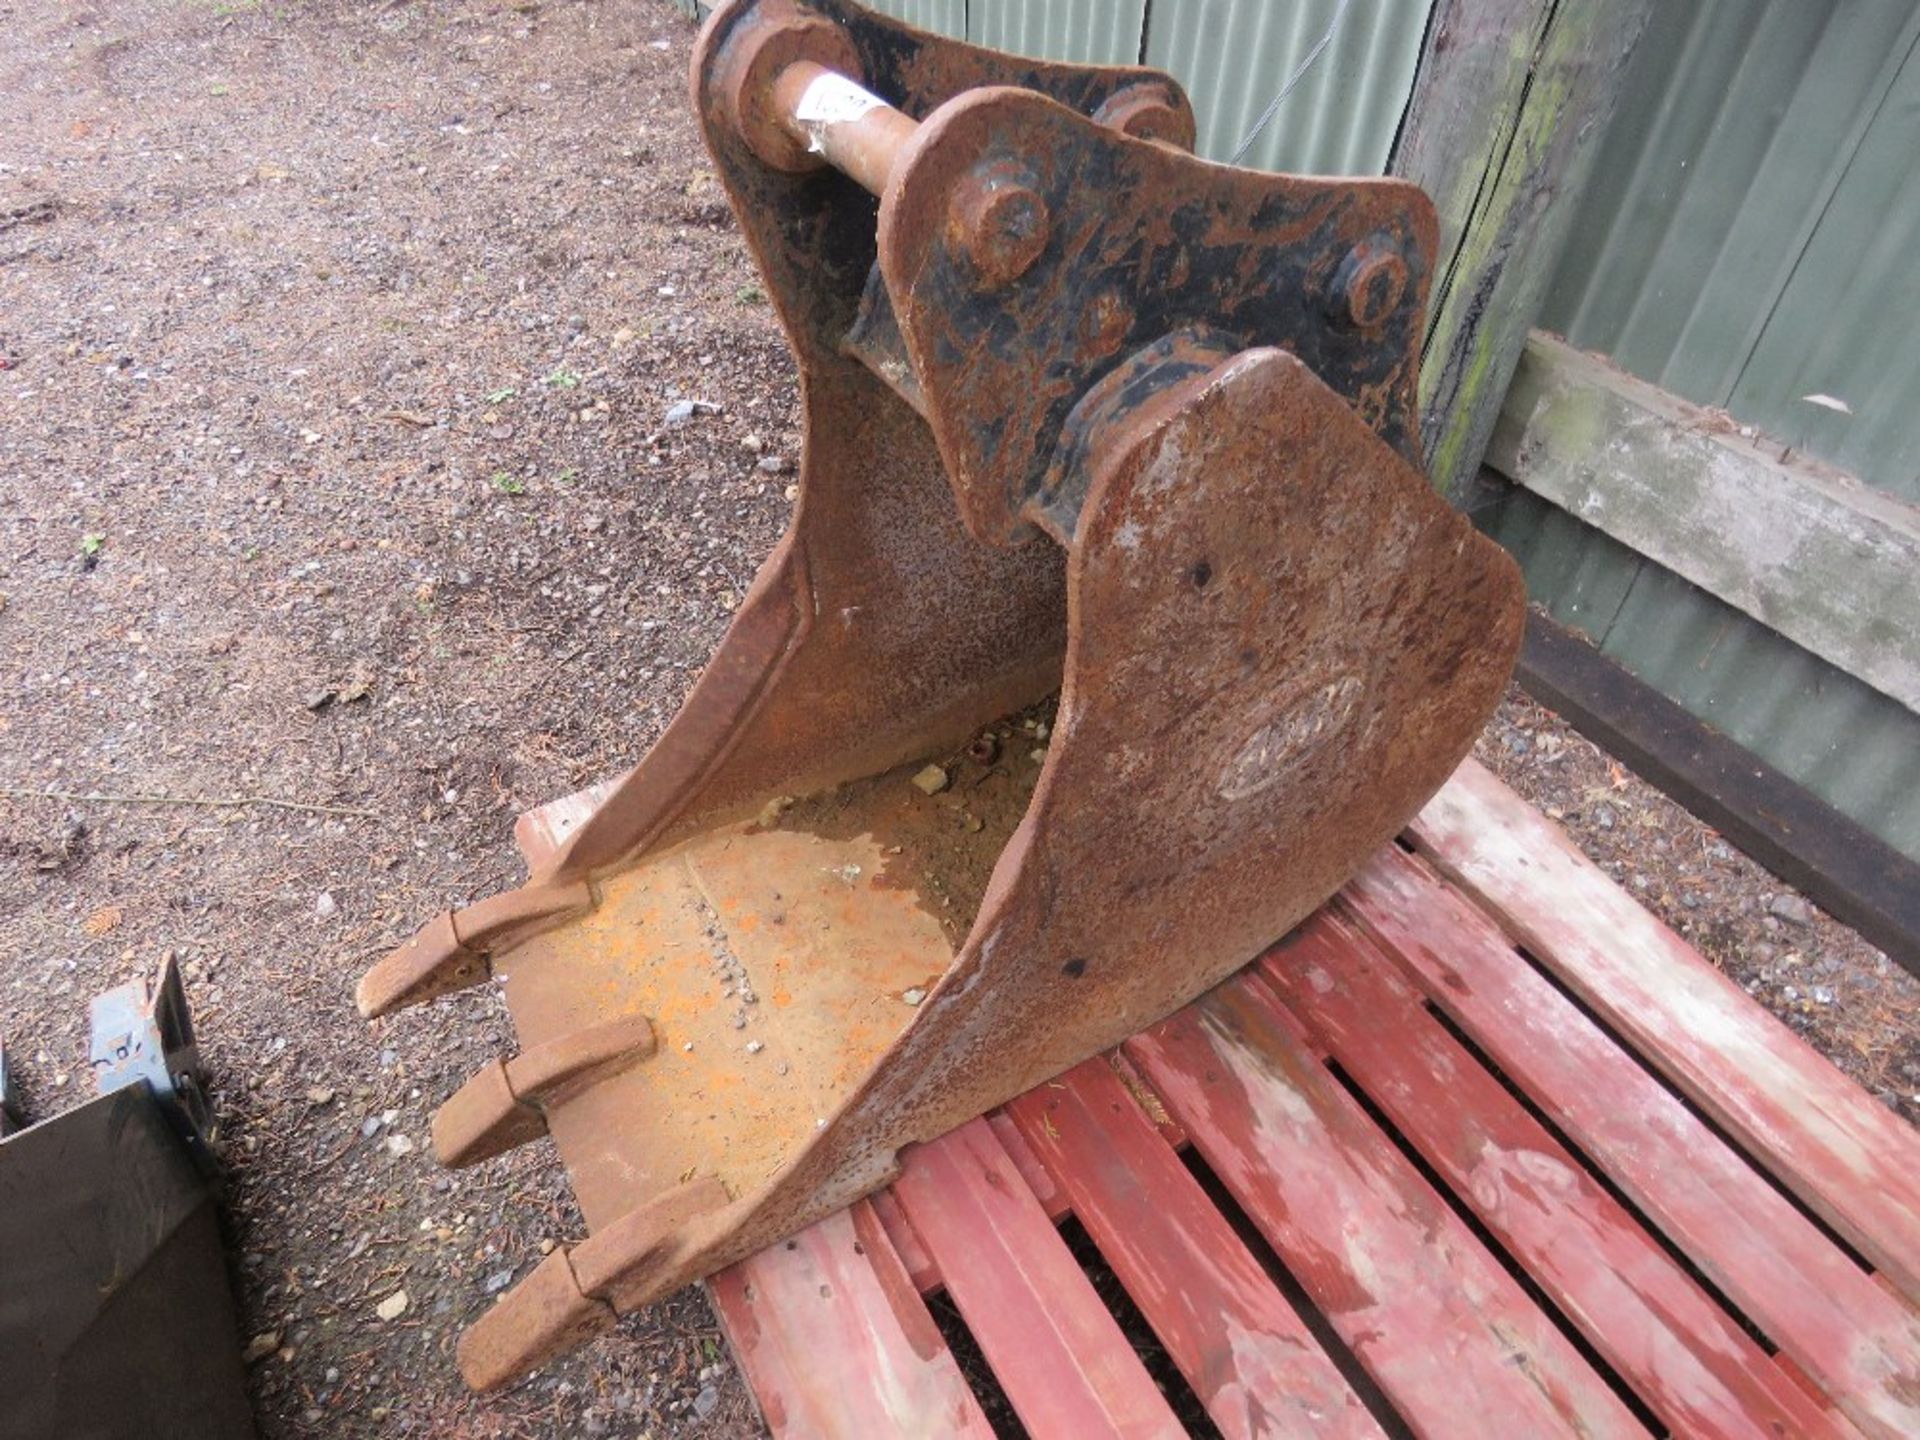 GEITH EXCAVATOR BUCKET, 45MM WIDTH ON 45MM PINS APPROX. THIS LOT IS SOLD UNDER THE AUCTIONEERS MA